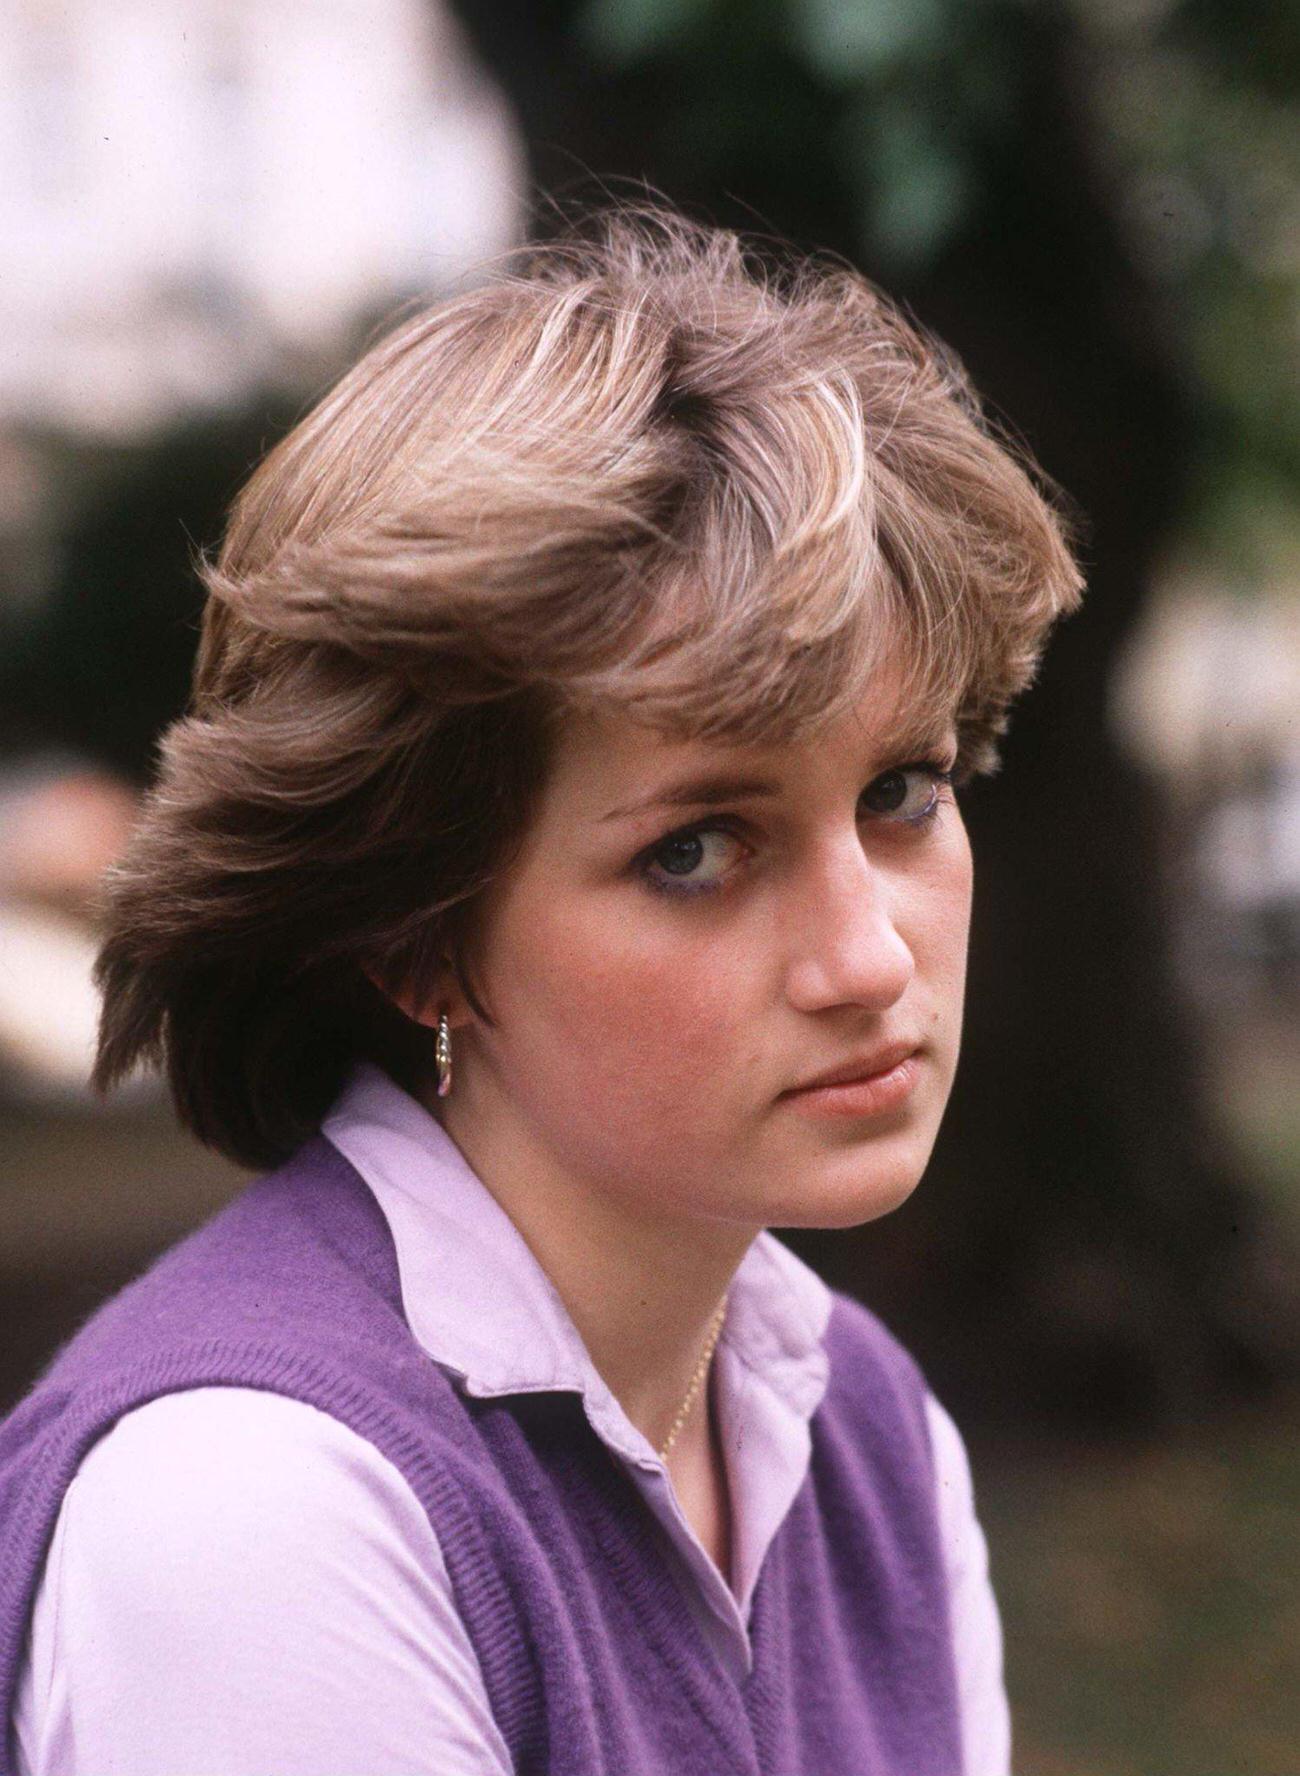 Teenager Lady Diana Spencer, Looking Pensive and Shy, Aged 19 at the Young England Kindergarden Nursery School.